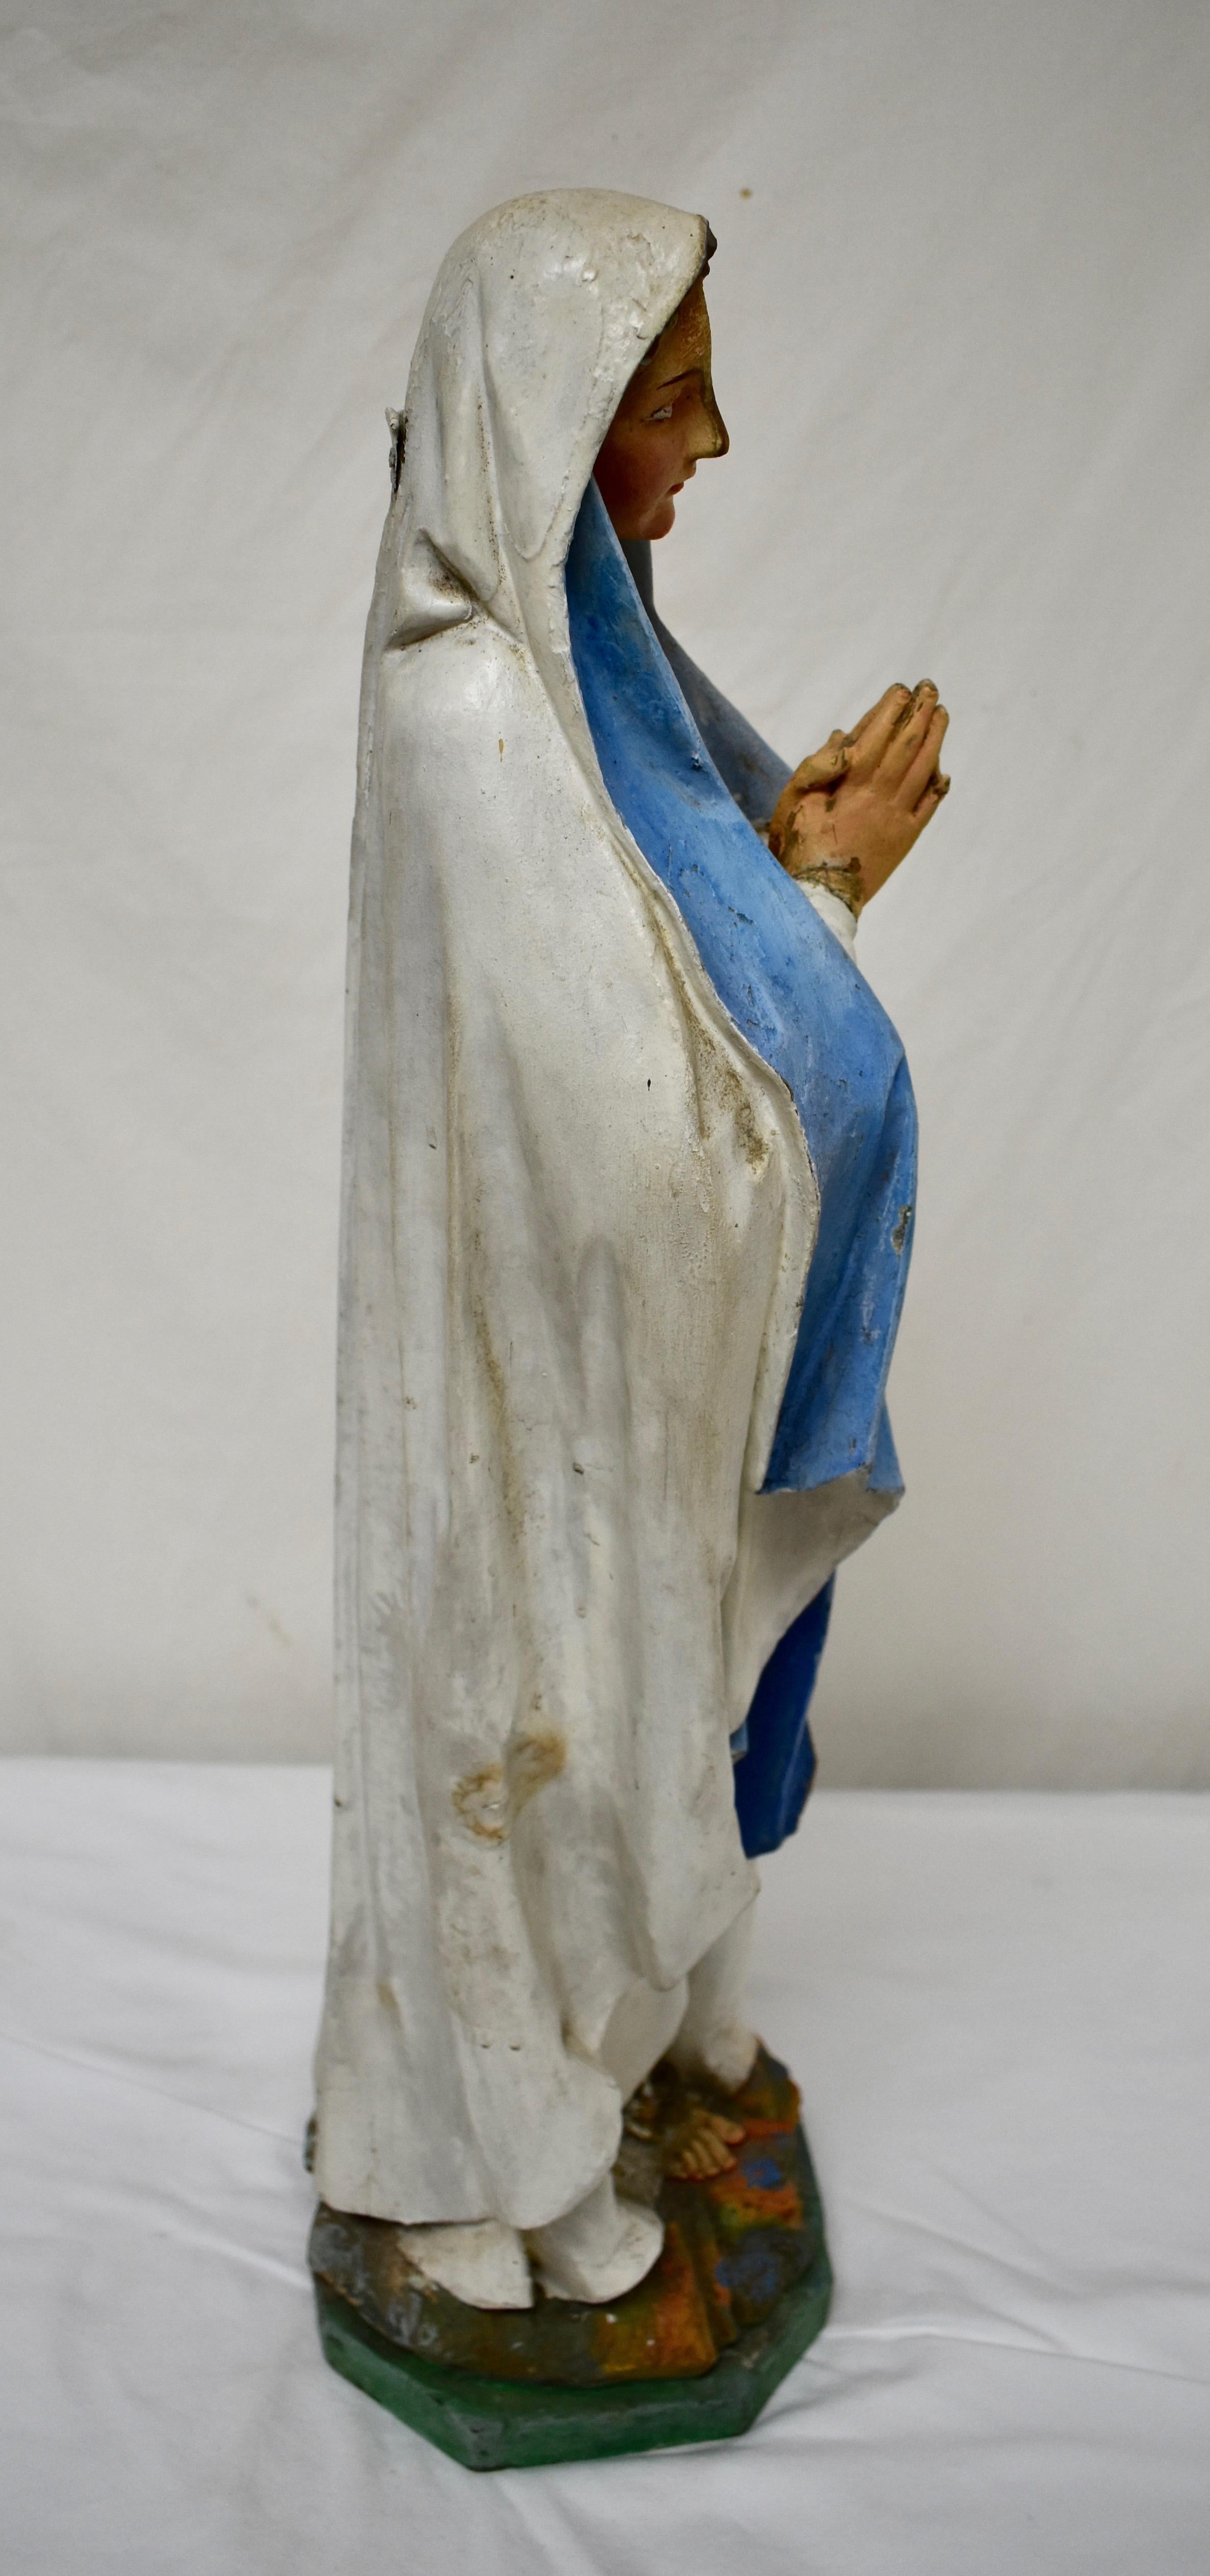 Hand Carved Wooden Sculpture of Our Lady of Lourdes 5